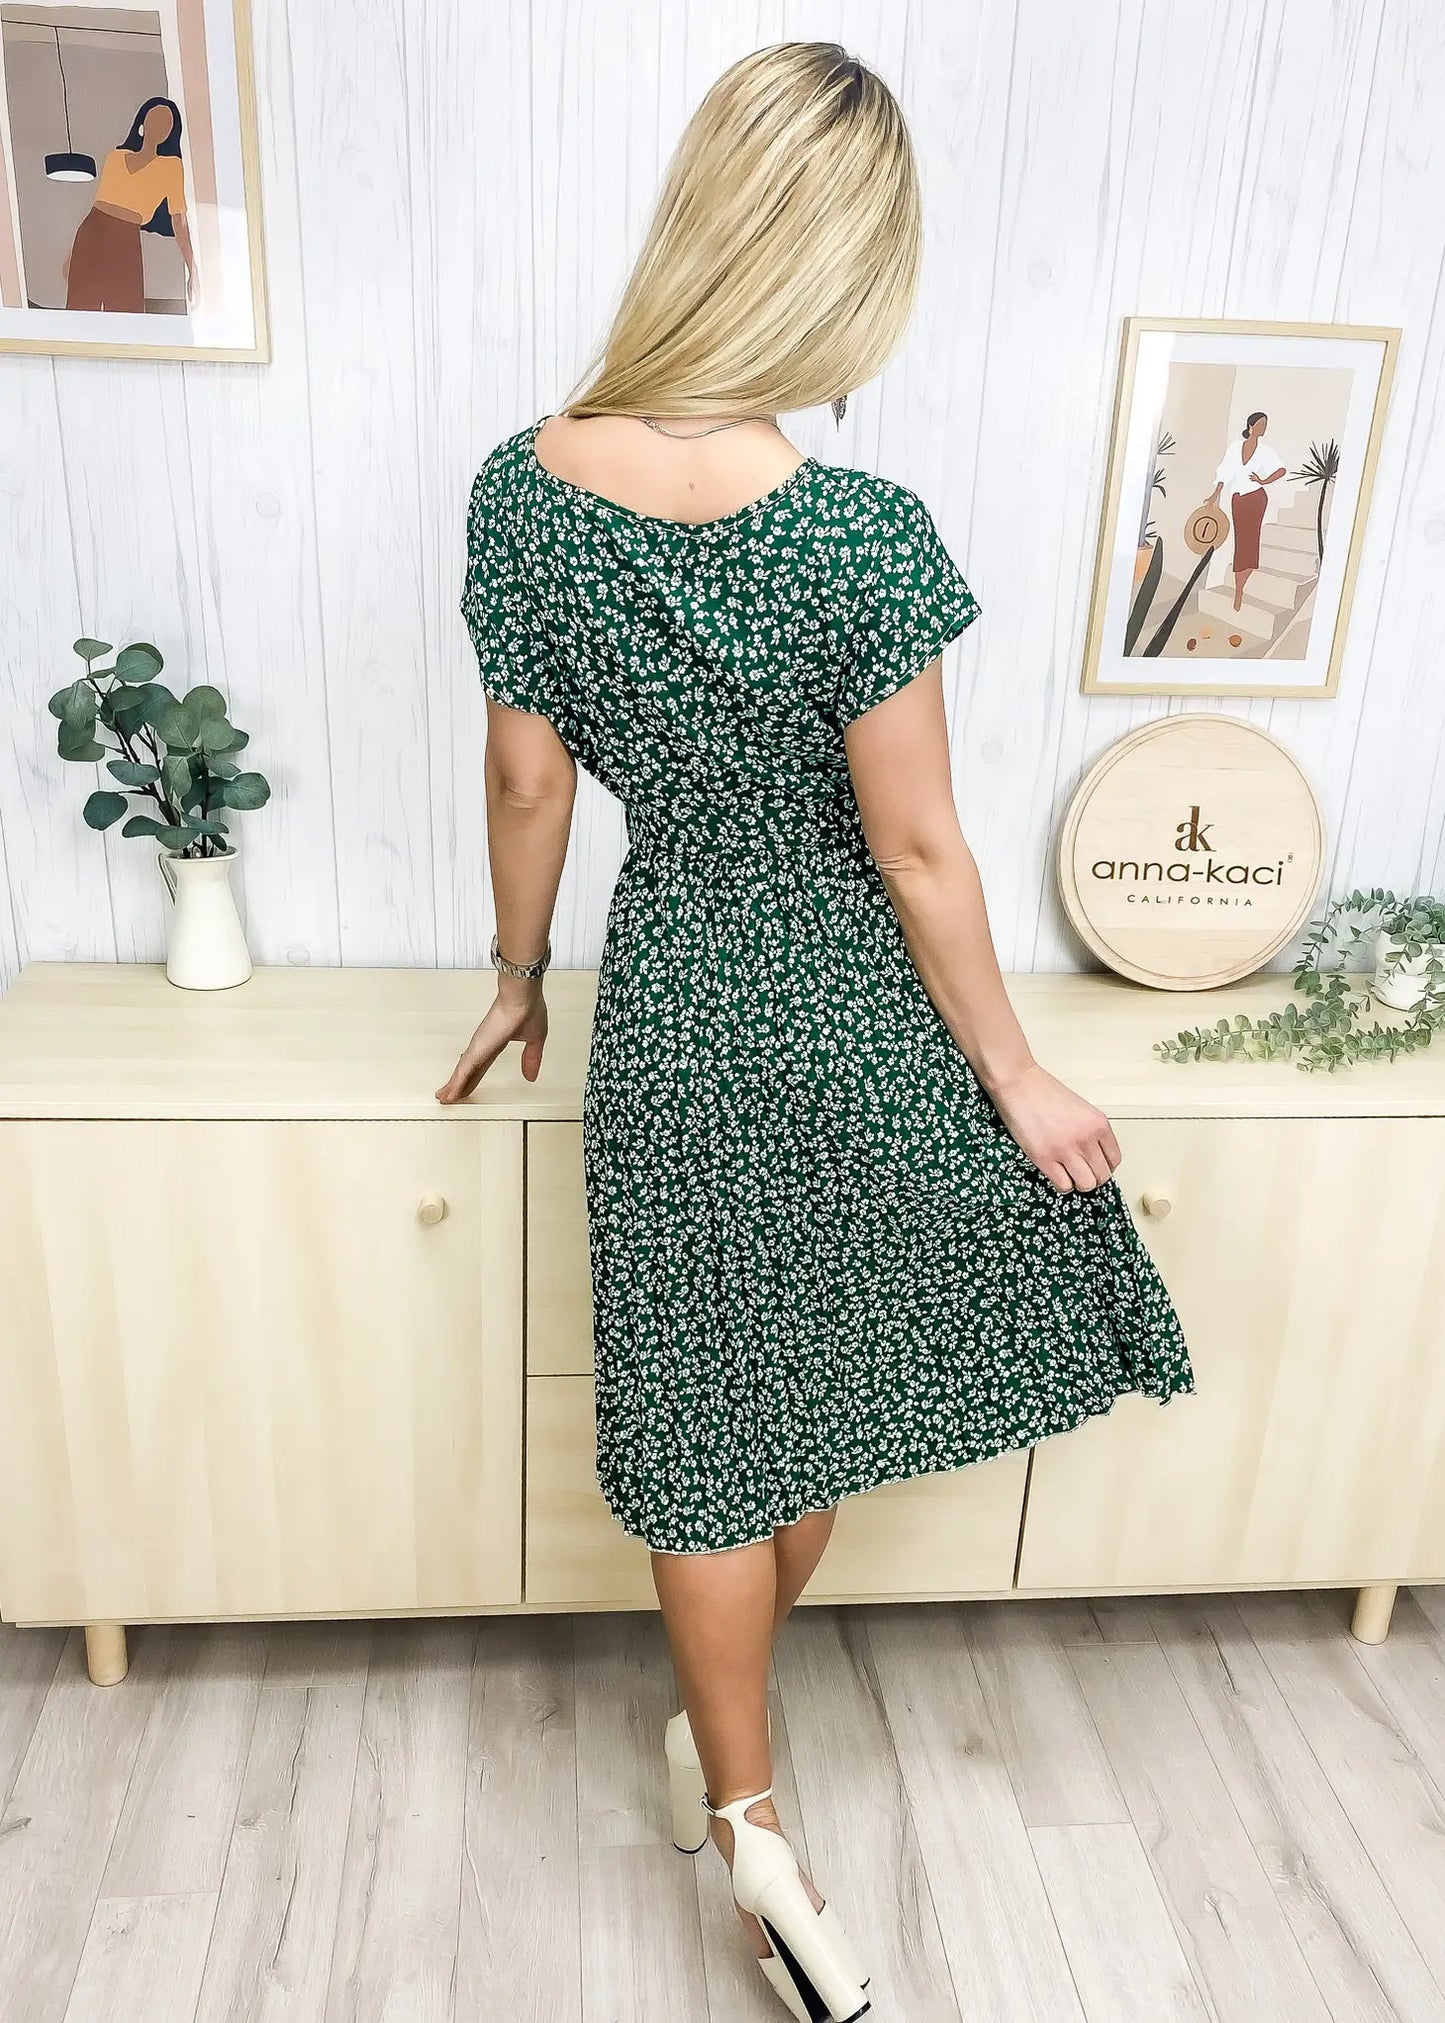 A model wearing a green dress featuring a round neck line, short sleeves, tie-waist detail, pleated skirt, and below knee length. Pair it with a necklace and boots for an elegant wine tasting in San Luis Obispo look.